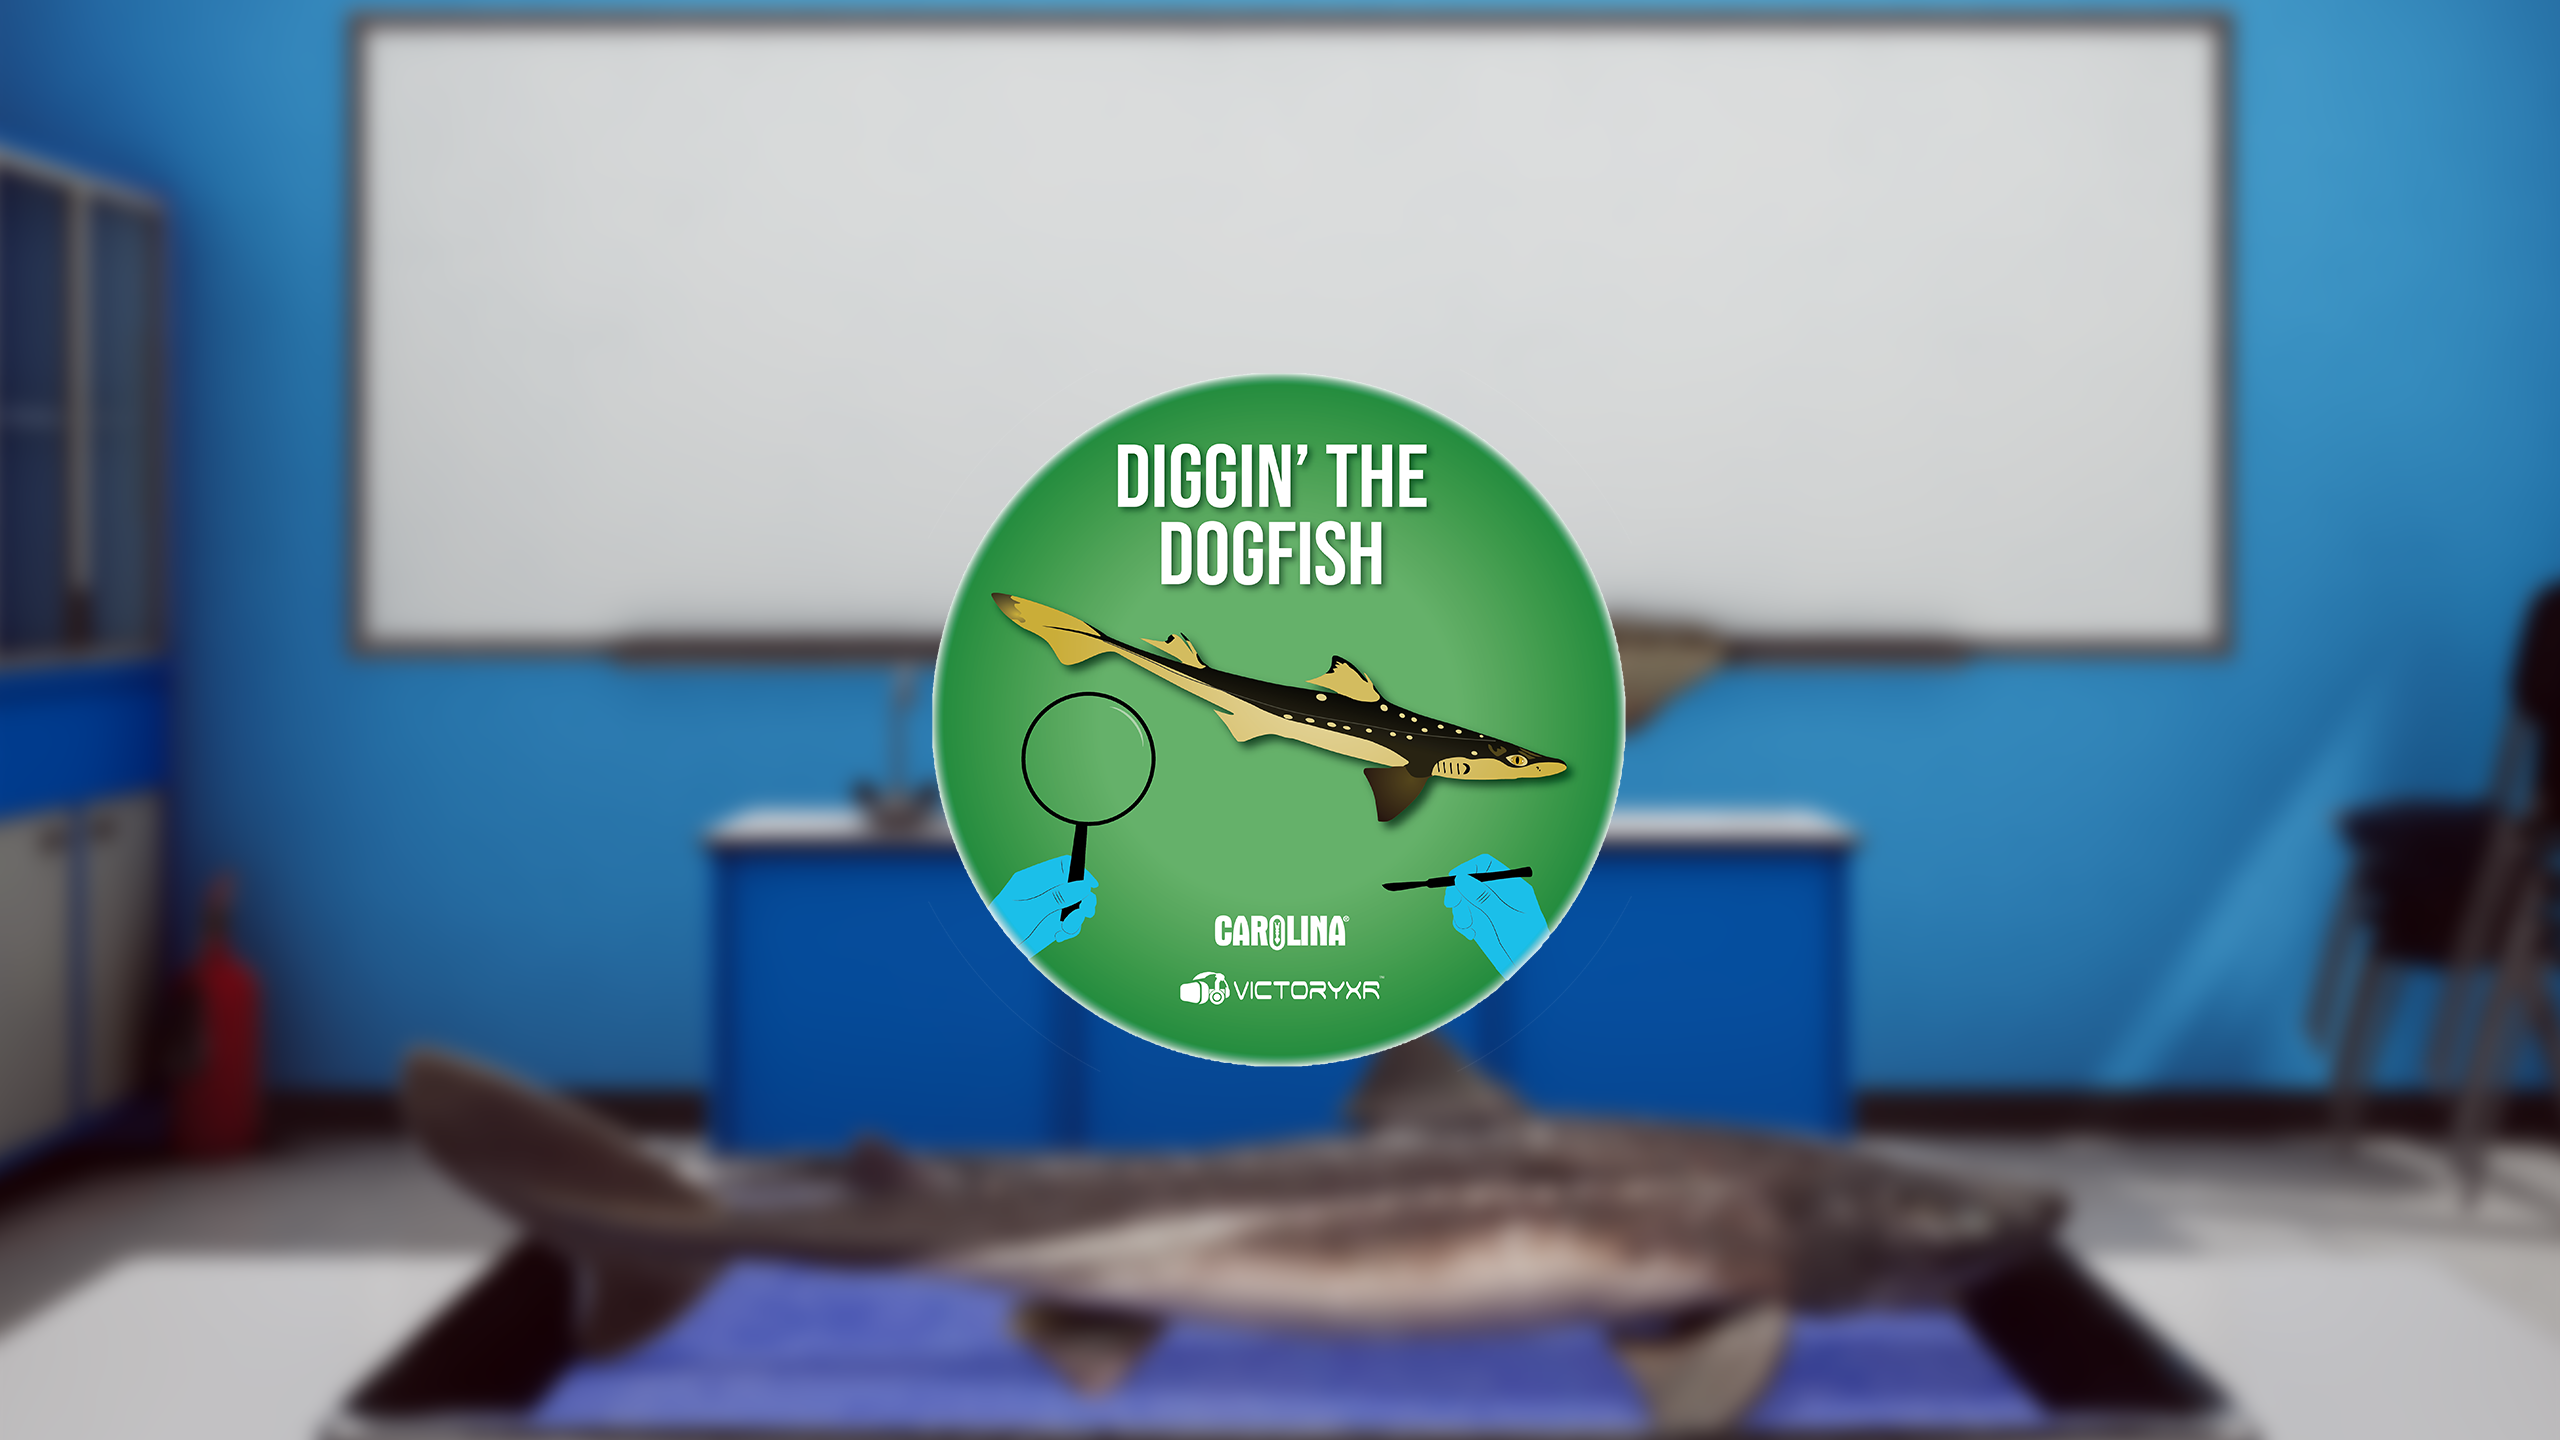 VR Dogfish Dissection: Diggin' the Dogfish